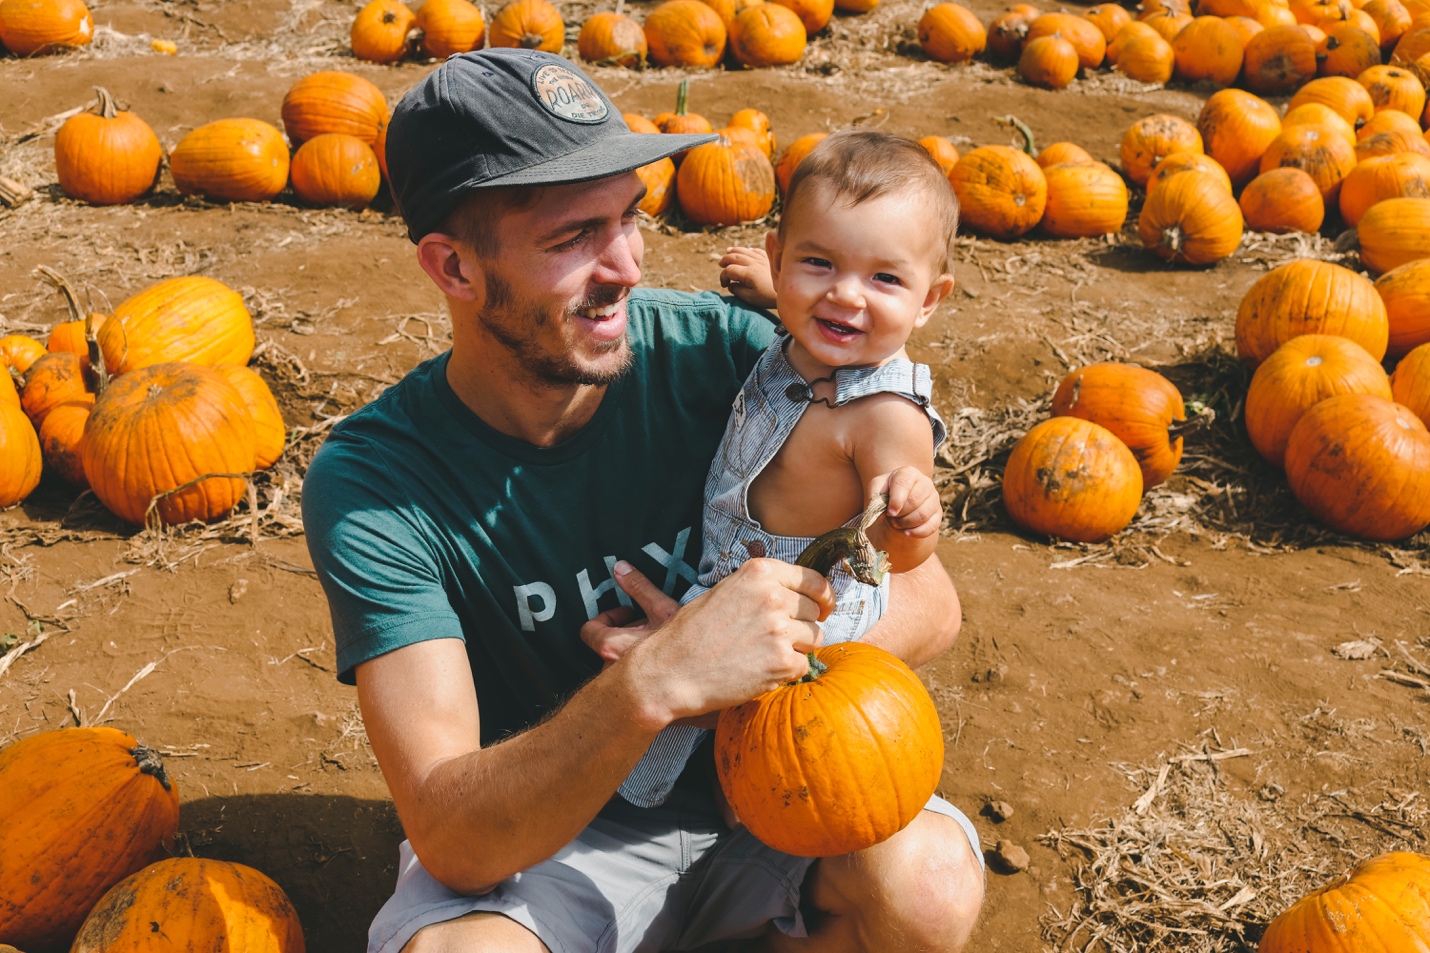 man with child at pumpkin patch